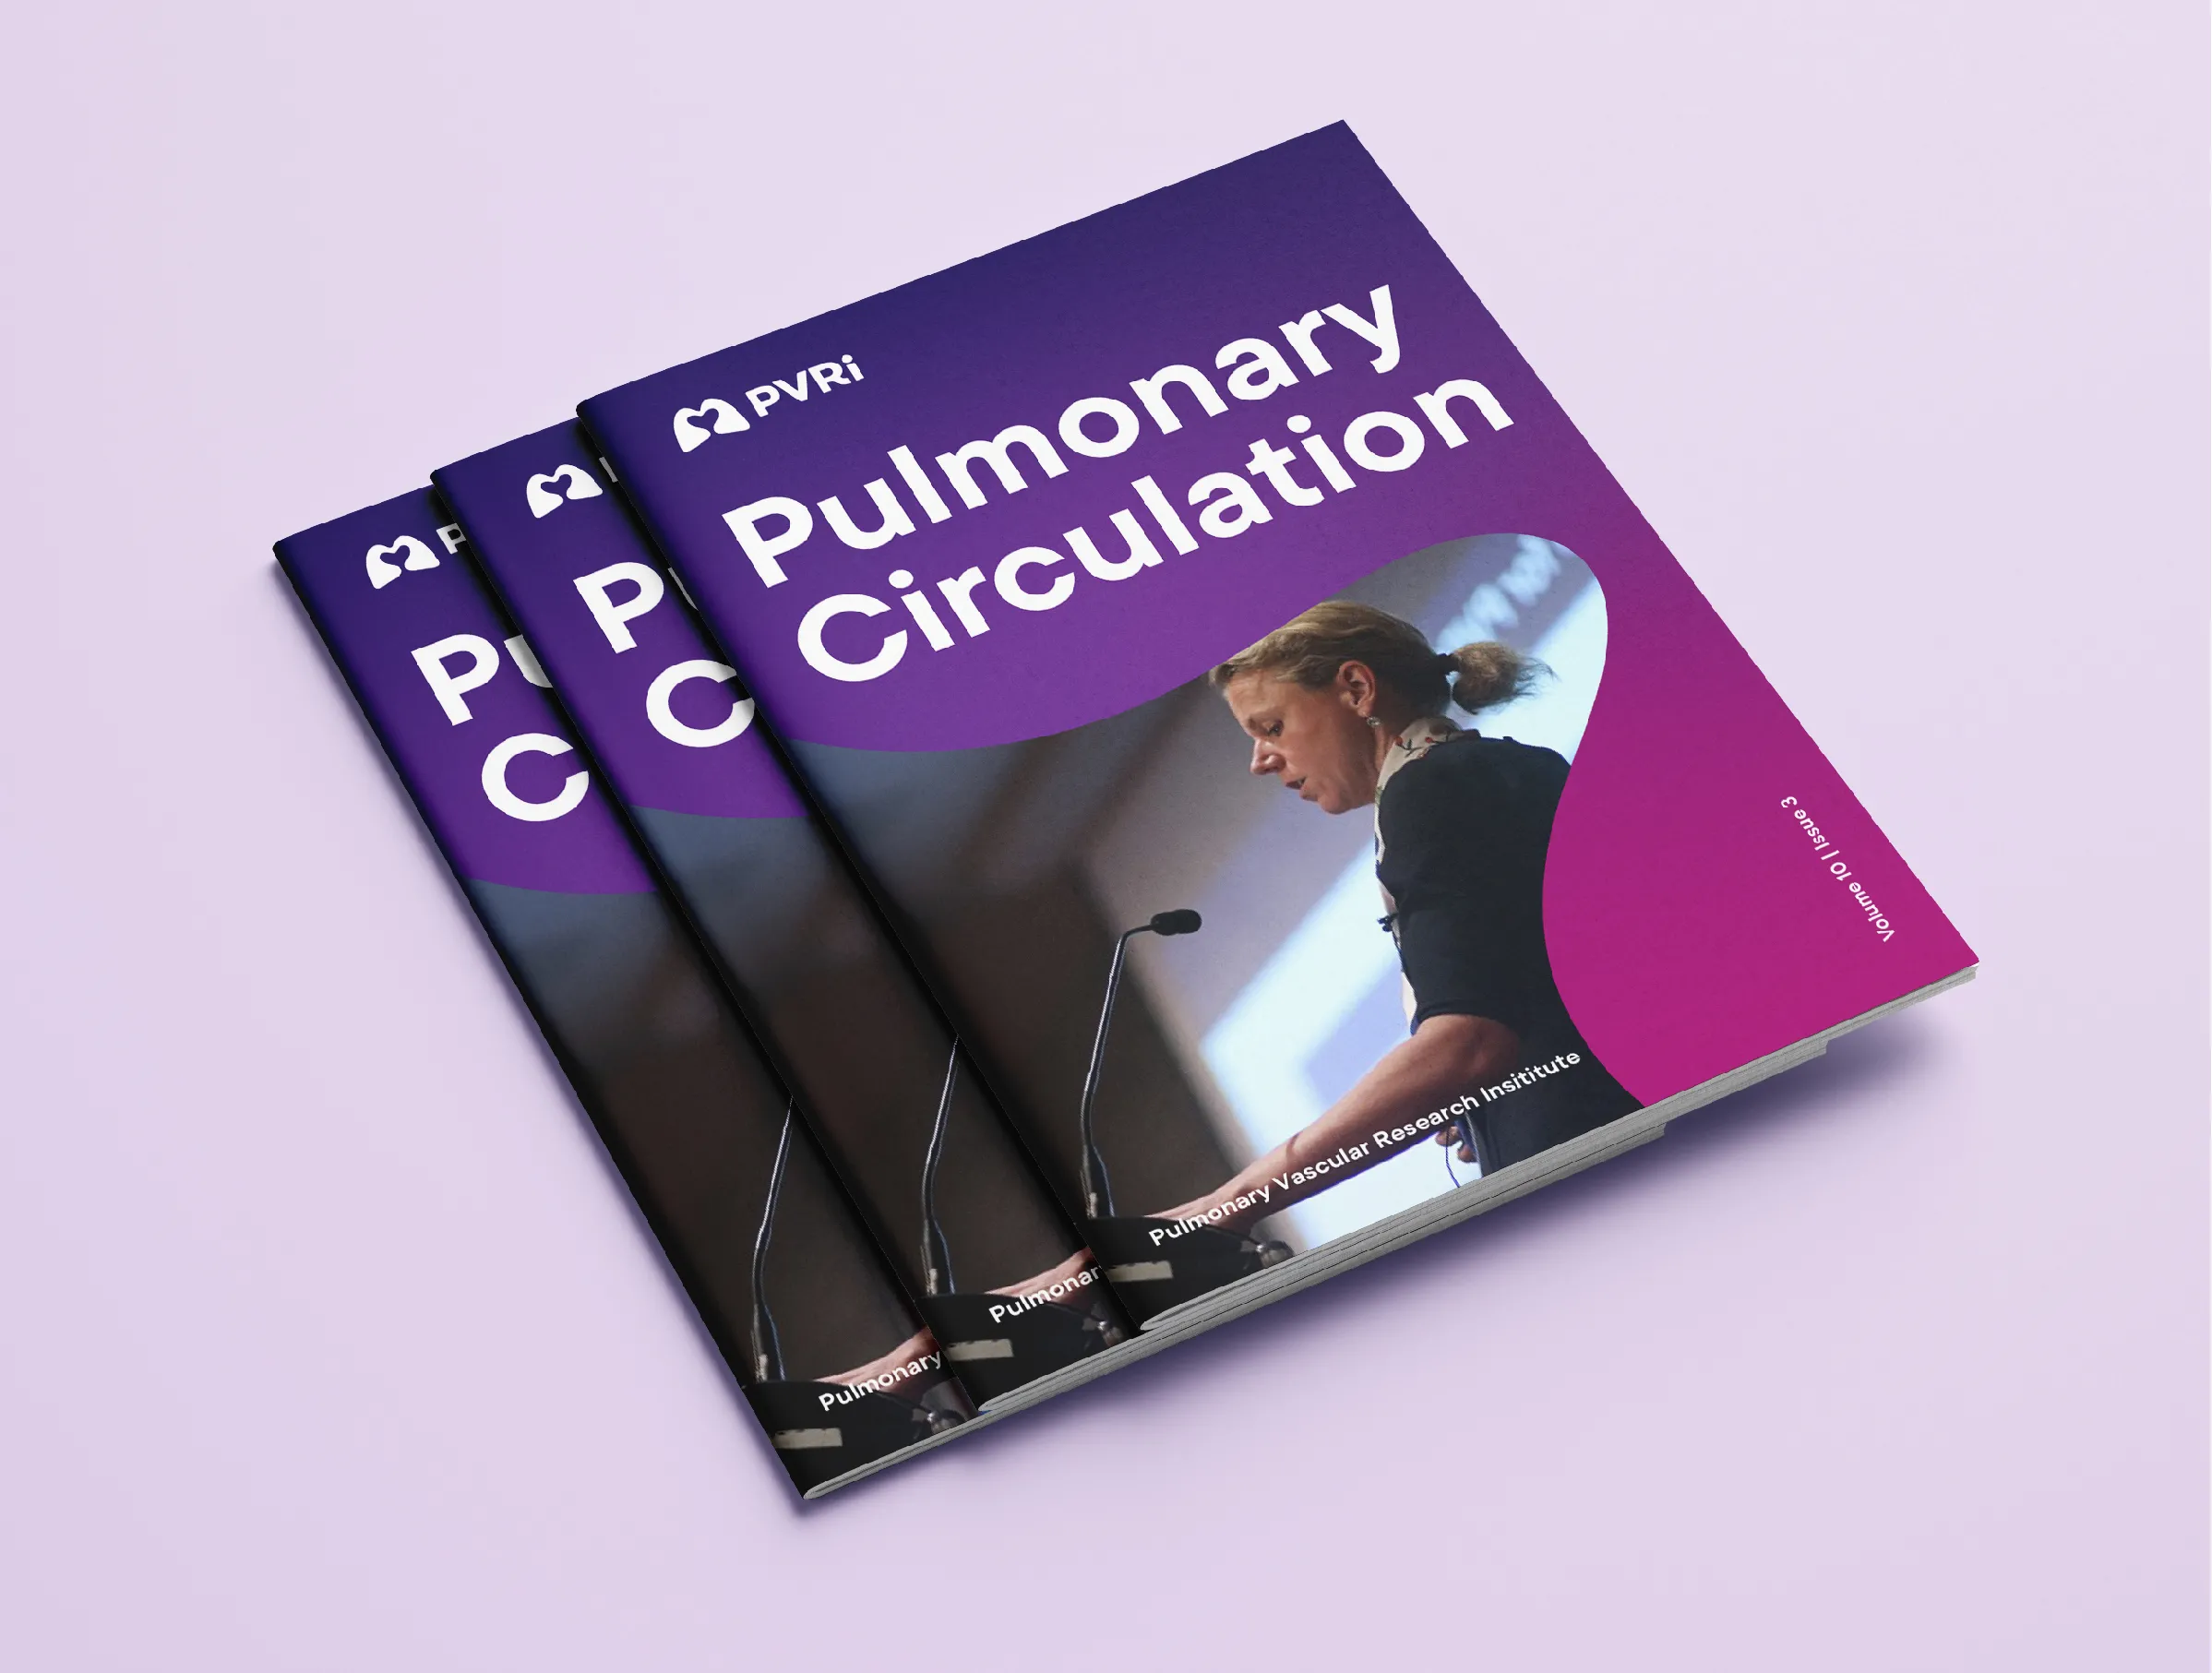 Stack of PVRI's Pulmonary Circulation publications in the new branding